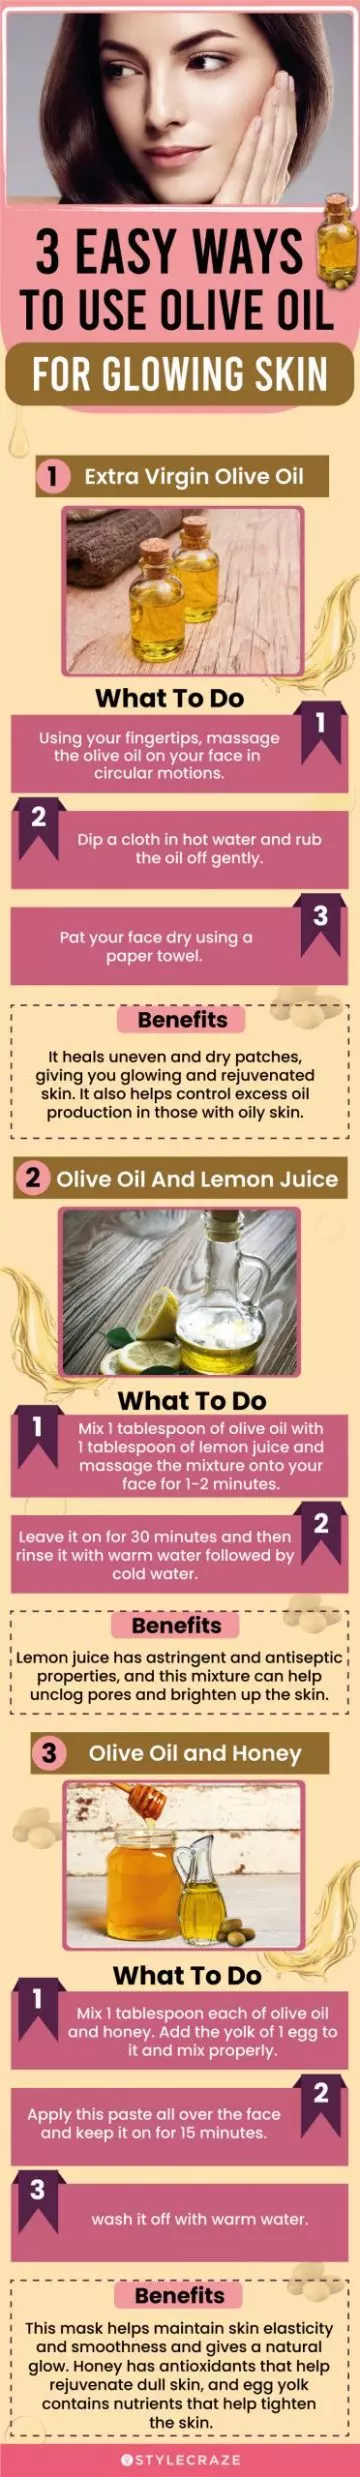 3 easy ways to use olive oil for a glowing skin (infographic)